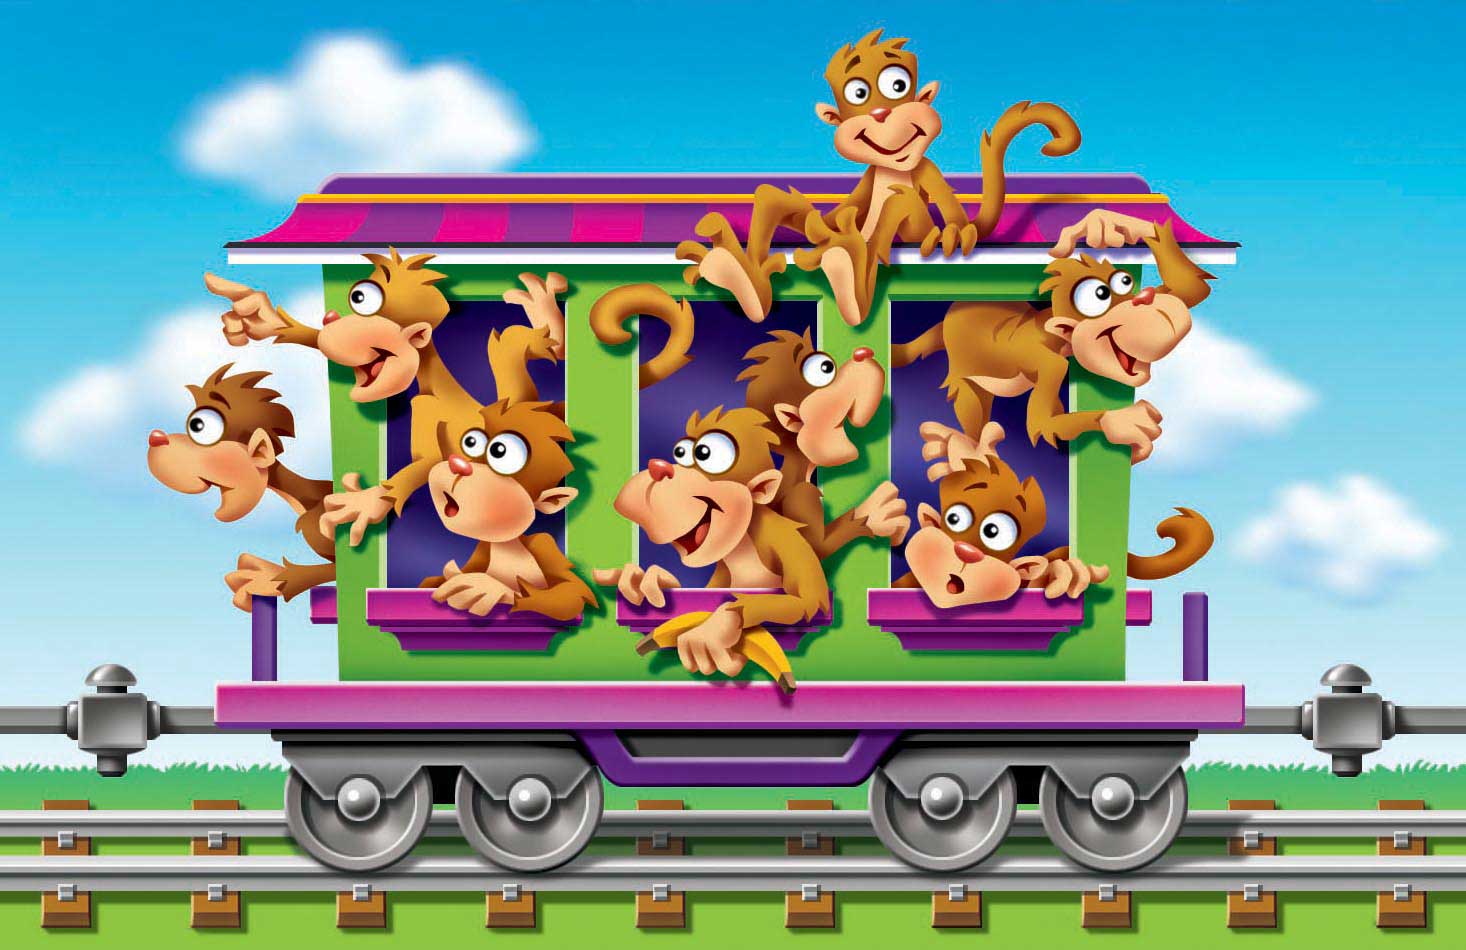 monkeys-hanging-out-and-riding-in-traincar